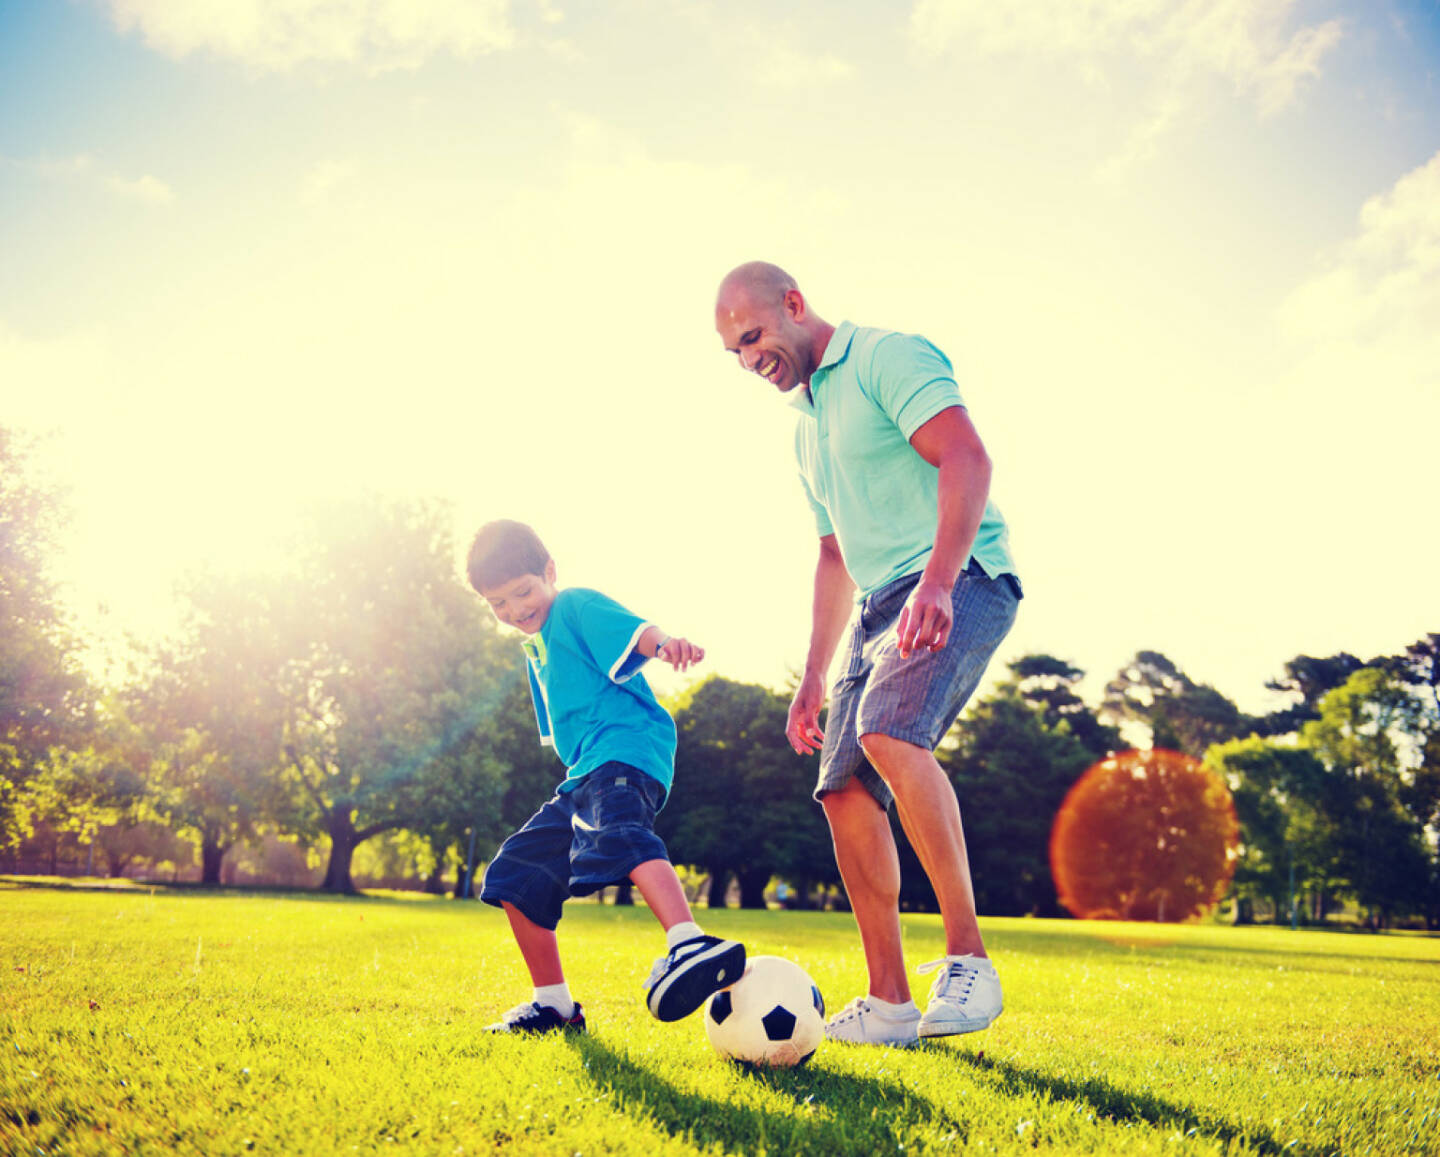 Vater, Sohn, Fussball, spielen, Familie, Beziehung, Park, http://www.shutterstock.com/de/pic-180140327/stock-photo-father-and-son-playing-ball-in-the-park.html